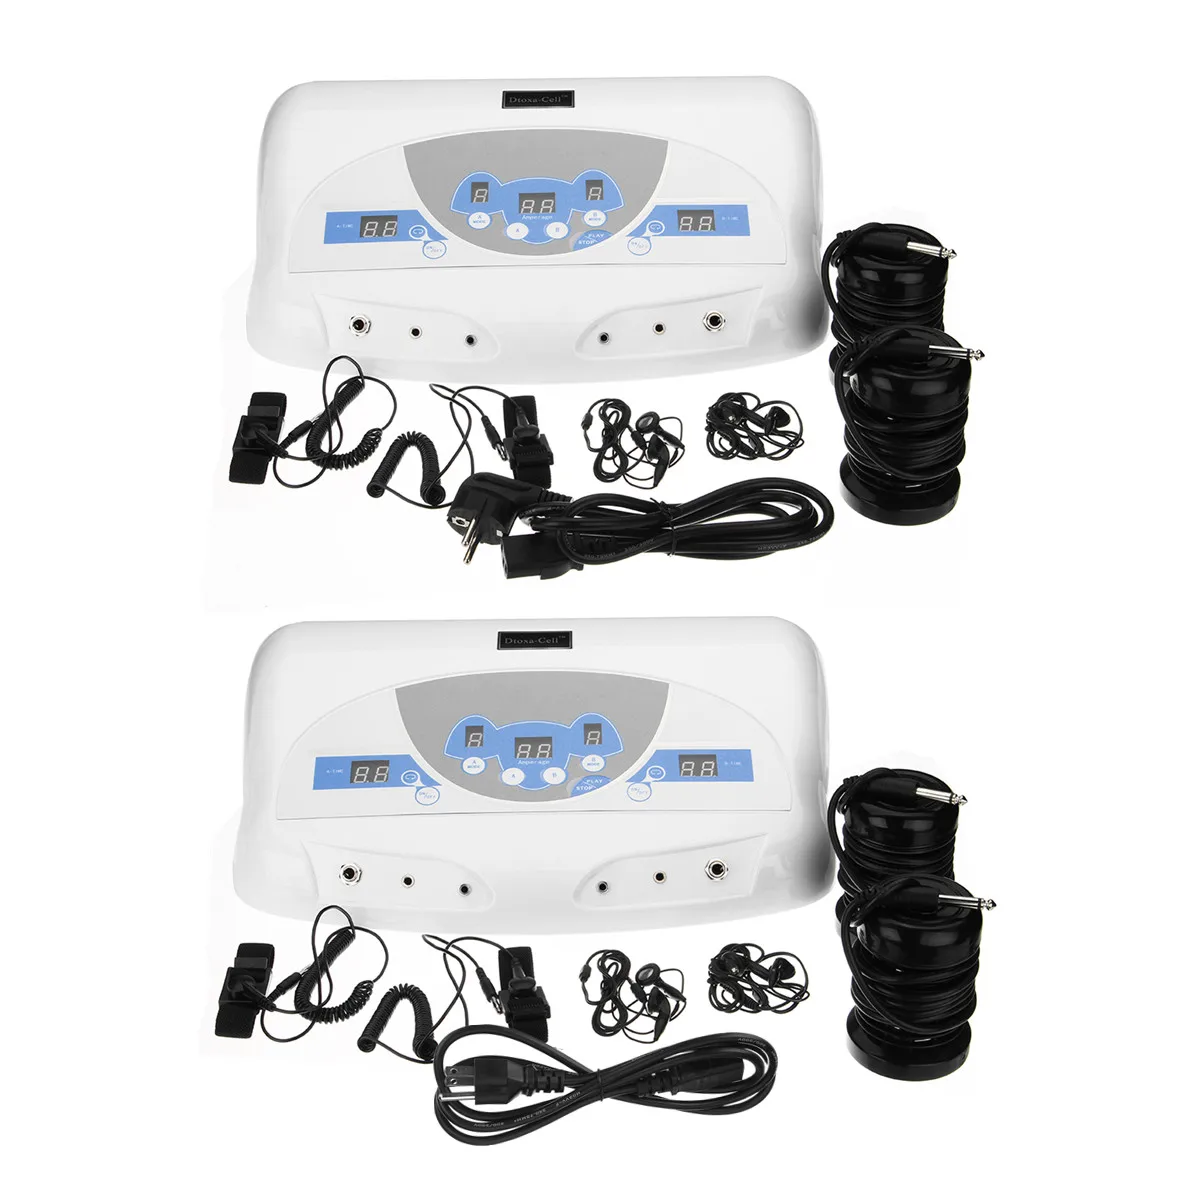 

New Blood Circulation Dual Detox Foot Spa/Ion Foot Detox Spa Bath/Ionic Cleanse Detox Foot Bath Home Massage Machine Relaxation